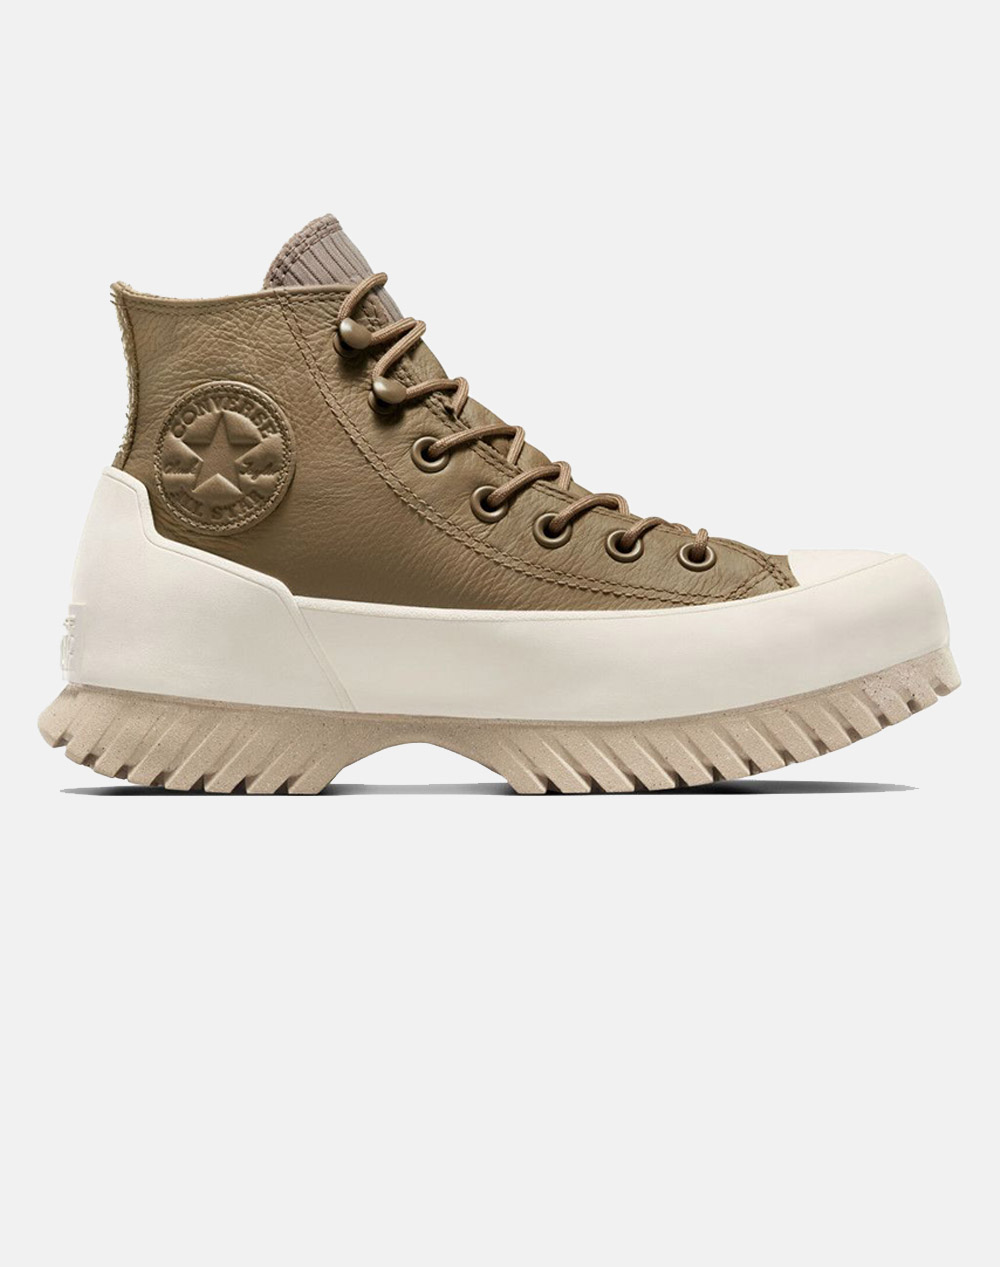 CONVERSE CHUCK TAYLOR ALL STAR LUGGED 2.0 COUNTER CLIMATE A04634C-244 SandyBrown 3700ACONV6070039_XR25845